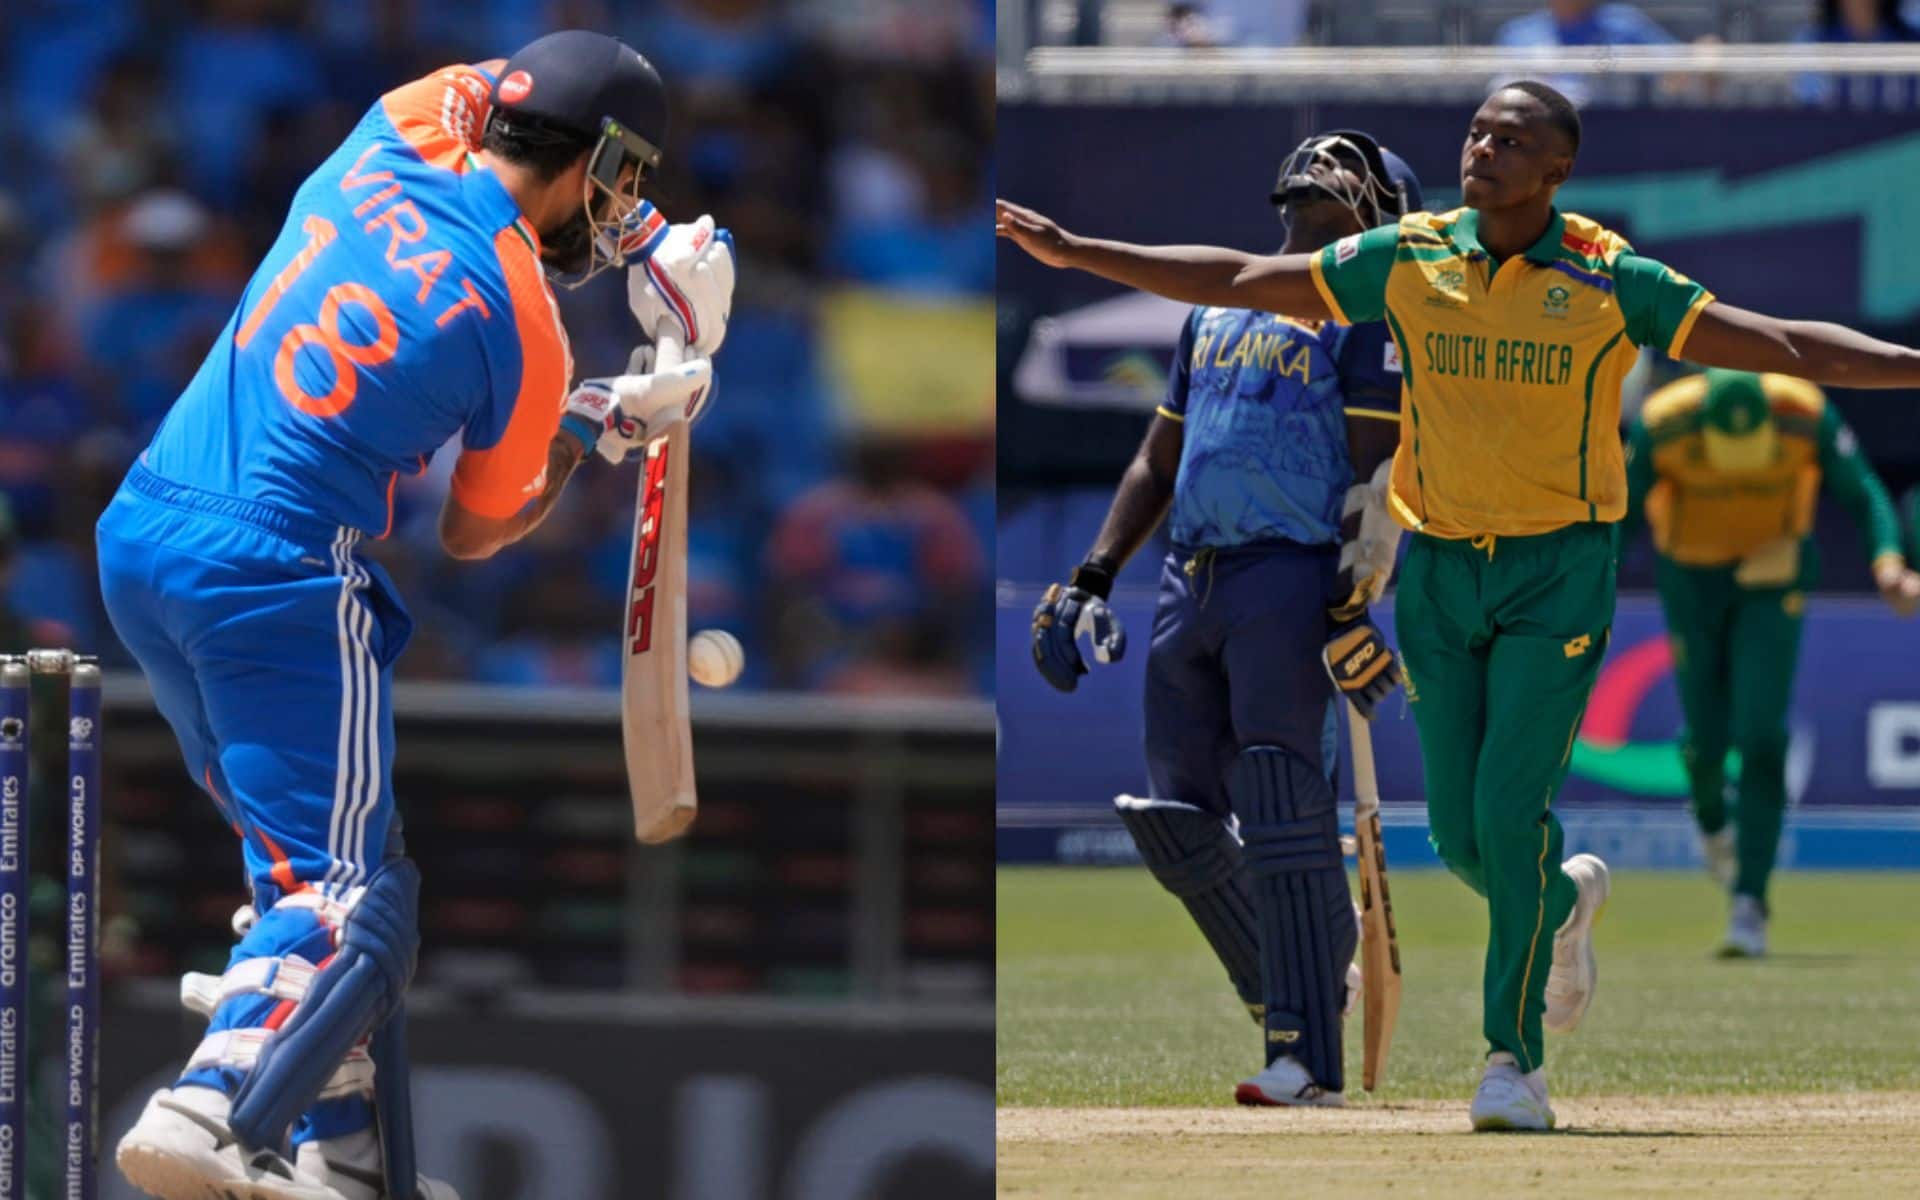 Virat Kohli vs KG Rabada will be a crucial face-off in this game [AP Photos]